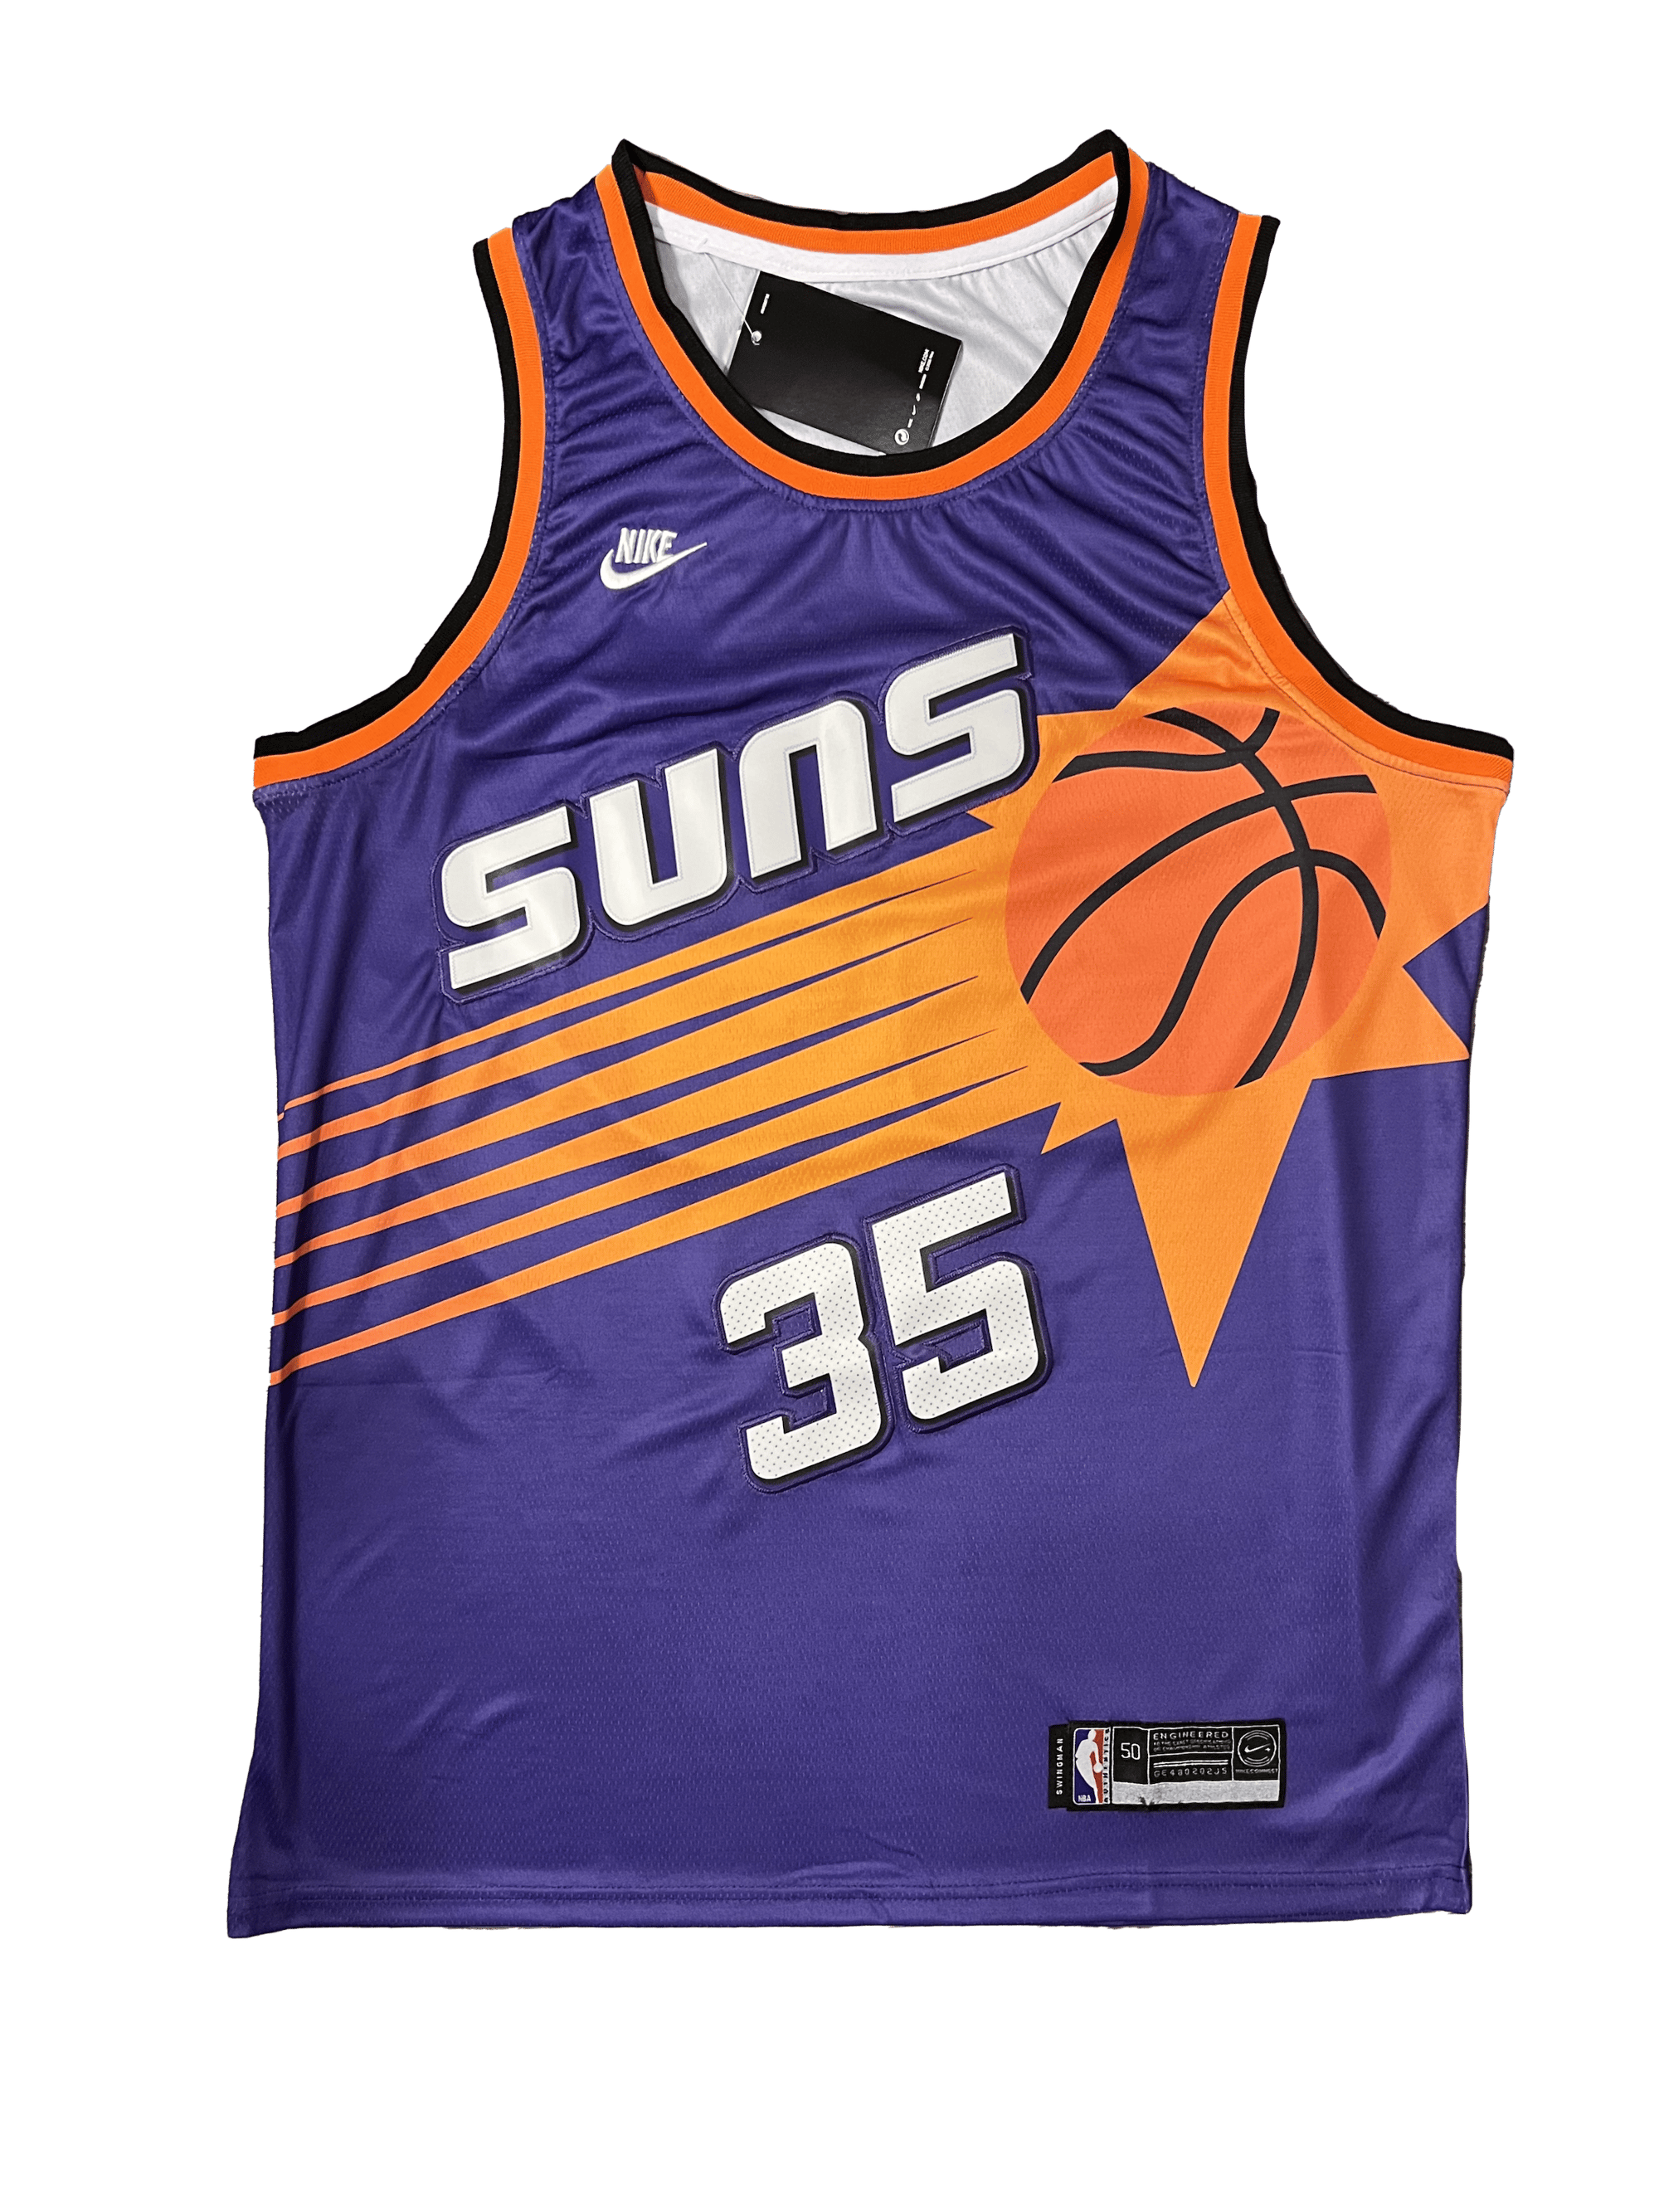 priority coal Arena Kevin Durant Phoenix Suns Classic Edition Jersey | JerseyBurgh Inc